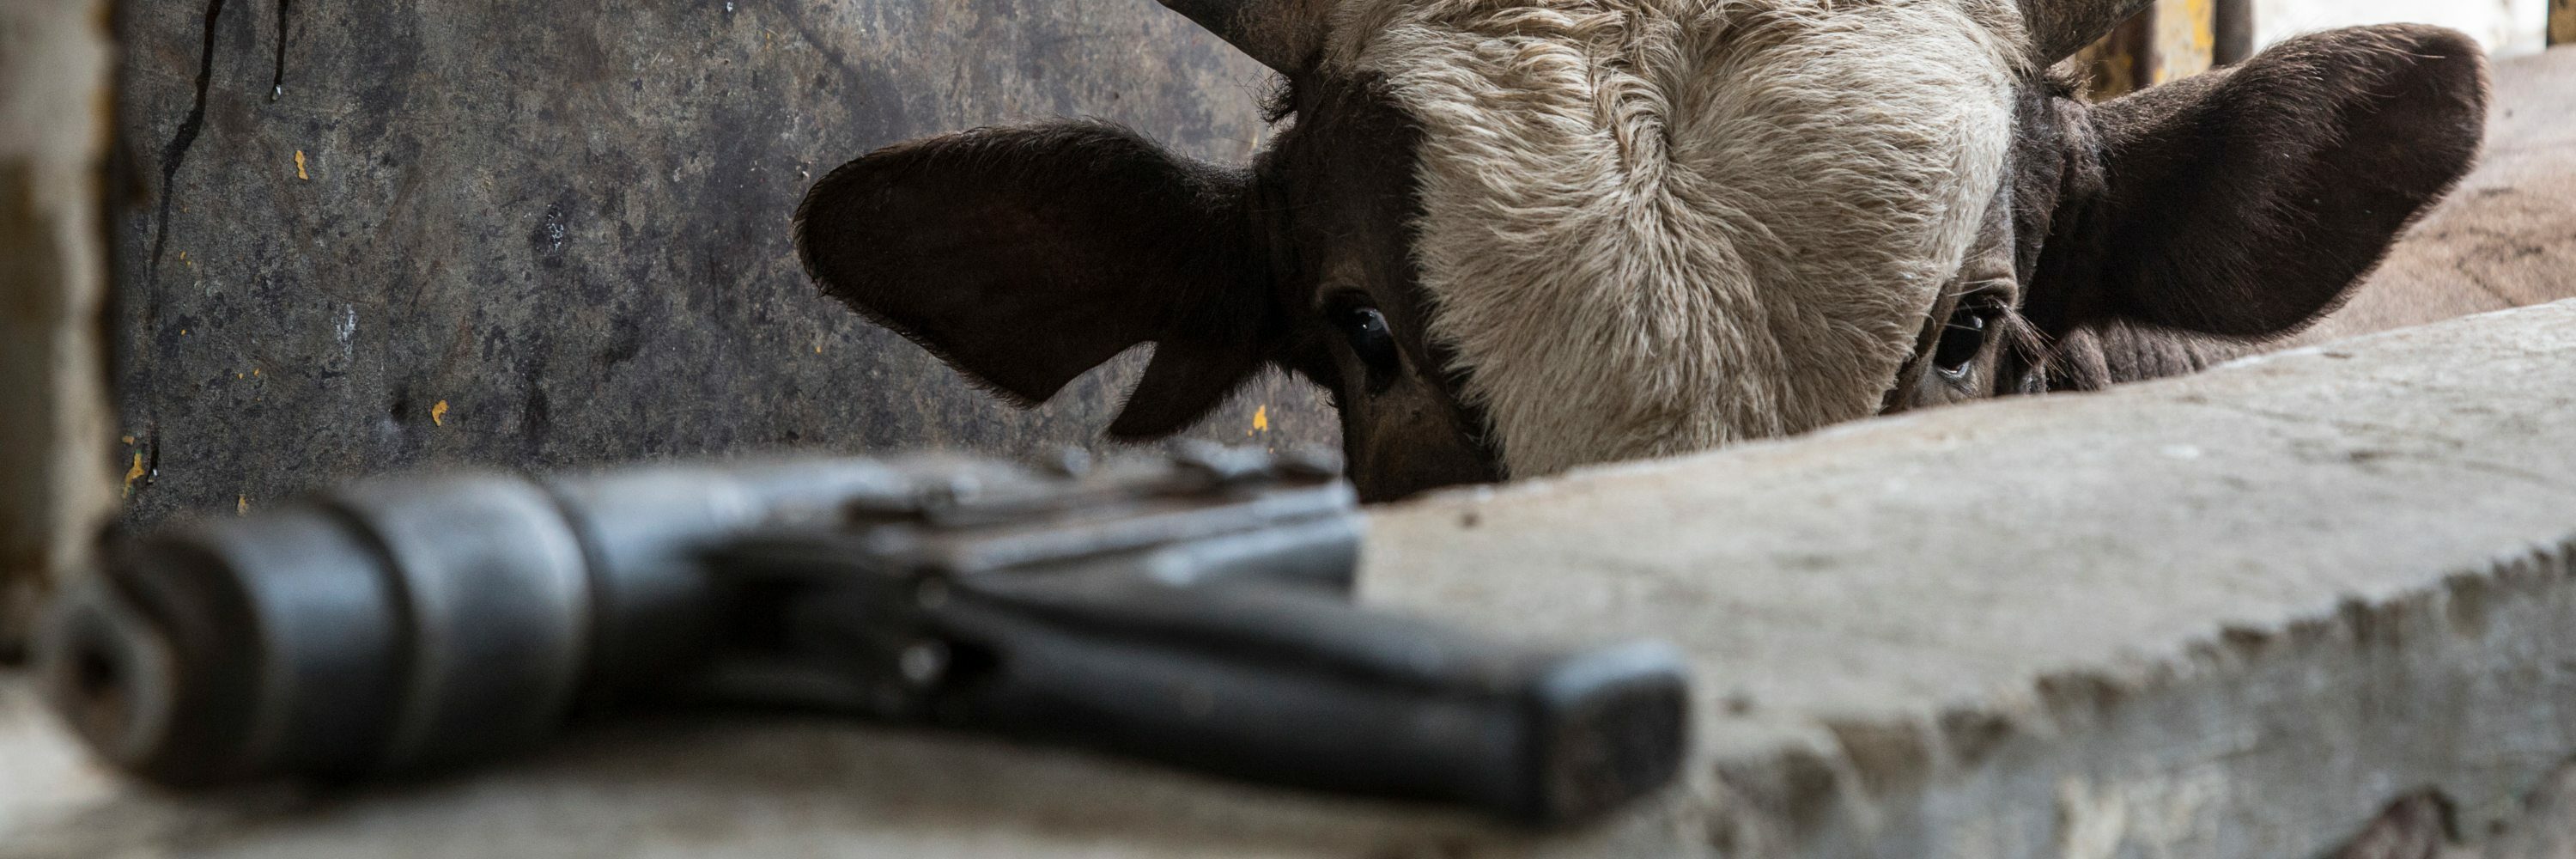 Stunning gun used by slaughterhouse workers to stun animals before killing them